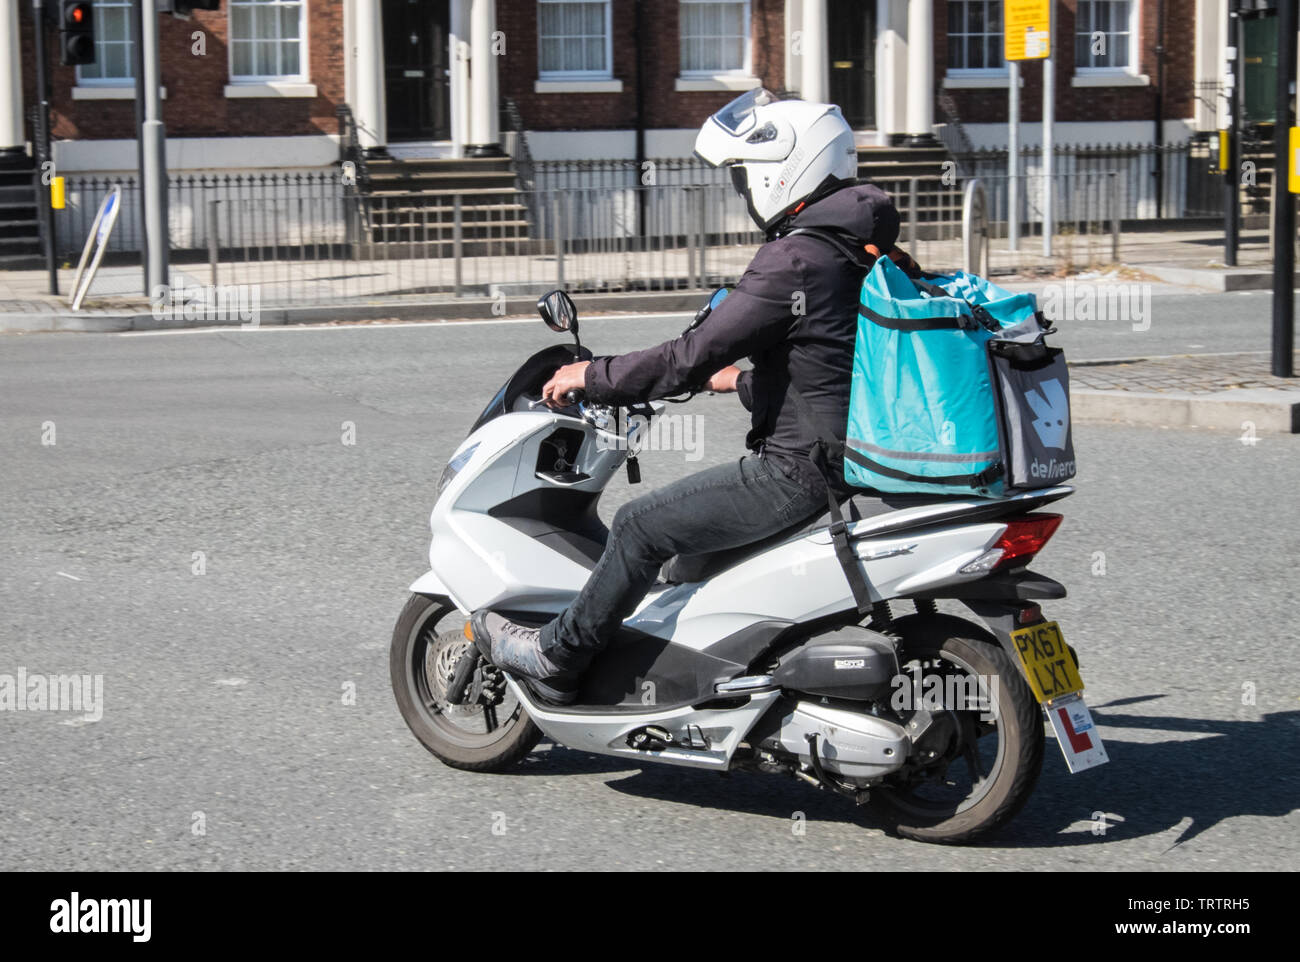 Deliveroo,food,courier,service,by,scooter,in,Liverpool,Merseyside,Northern,city,England,British,GB,UK,Great Britain,Britain,Europe, Stock Photo